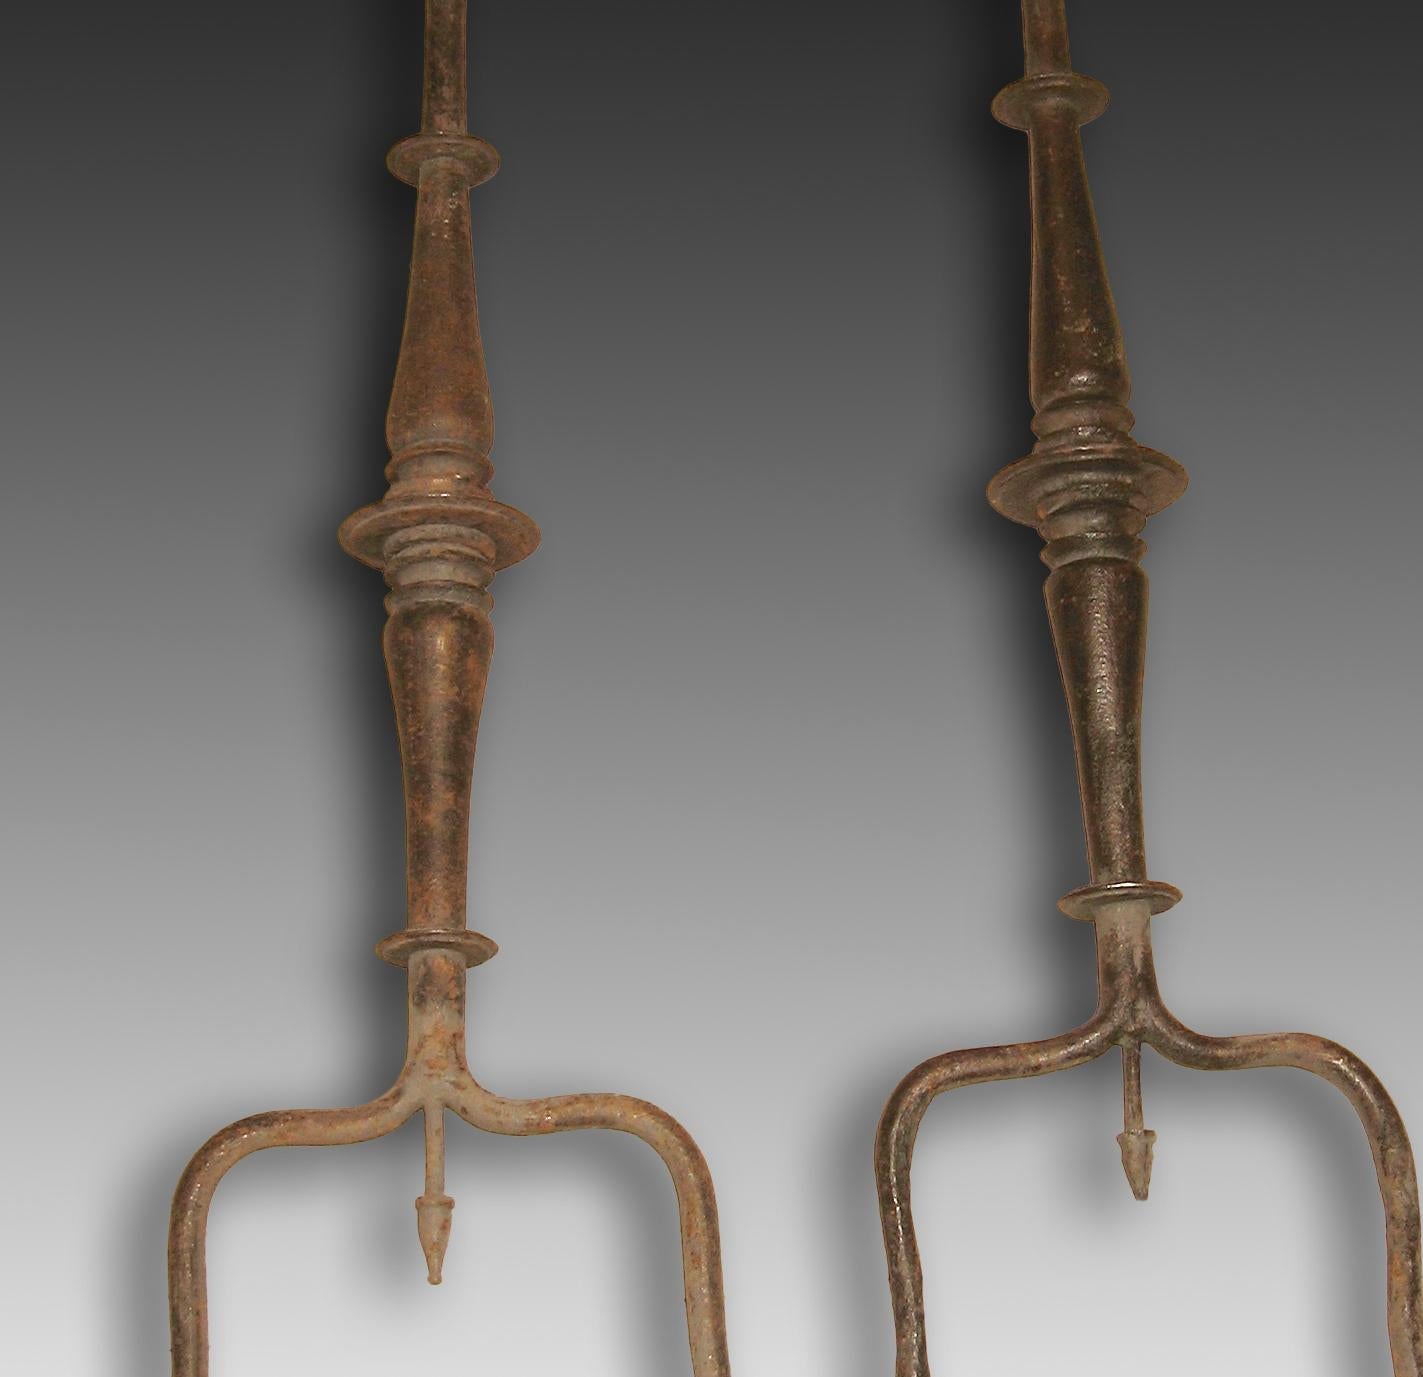 Pair of pawls on wrought iron fork, 17th century. 
Pair of fasteners made of wrought iron of the type called 